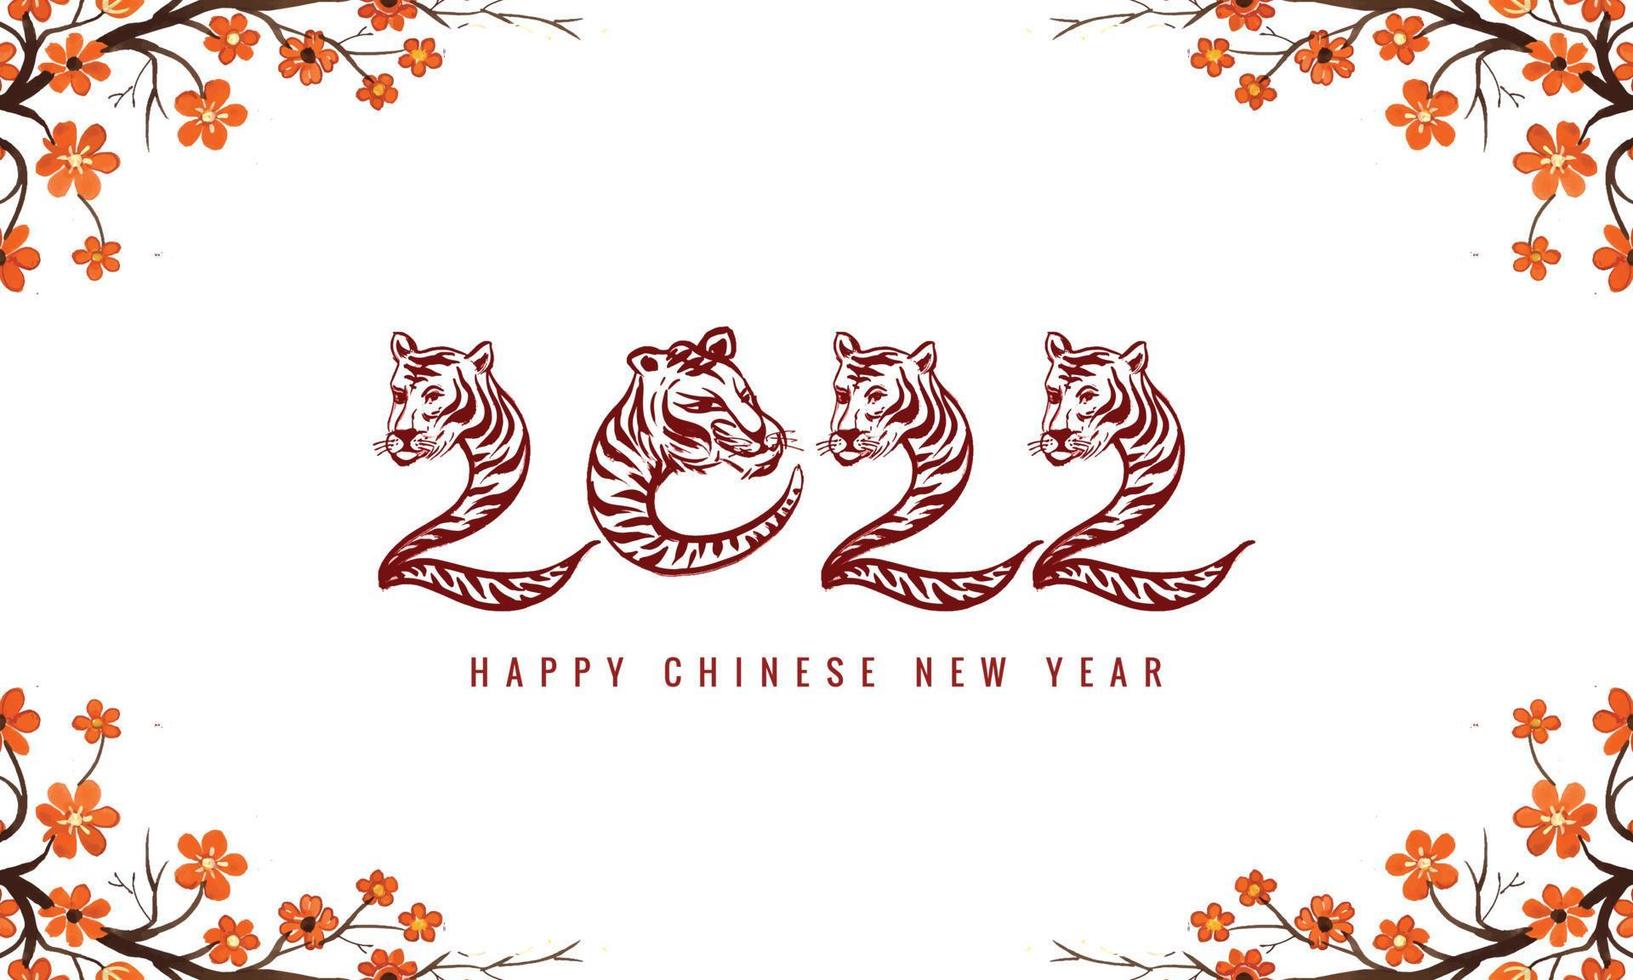 Decorative chinese floral new year 2022 symbol with a tiger face card design vector